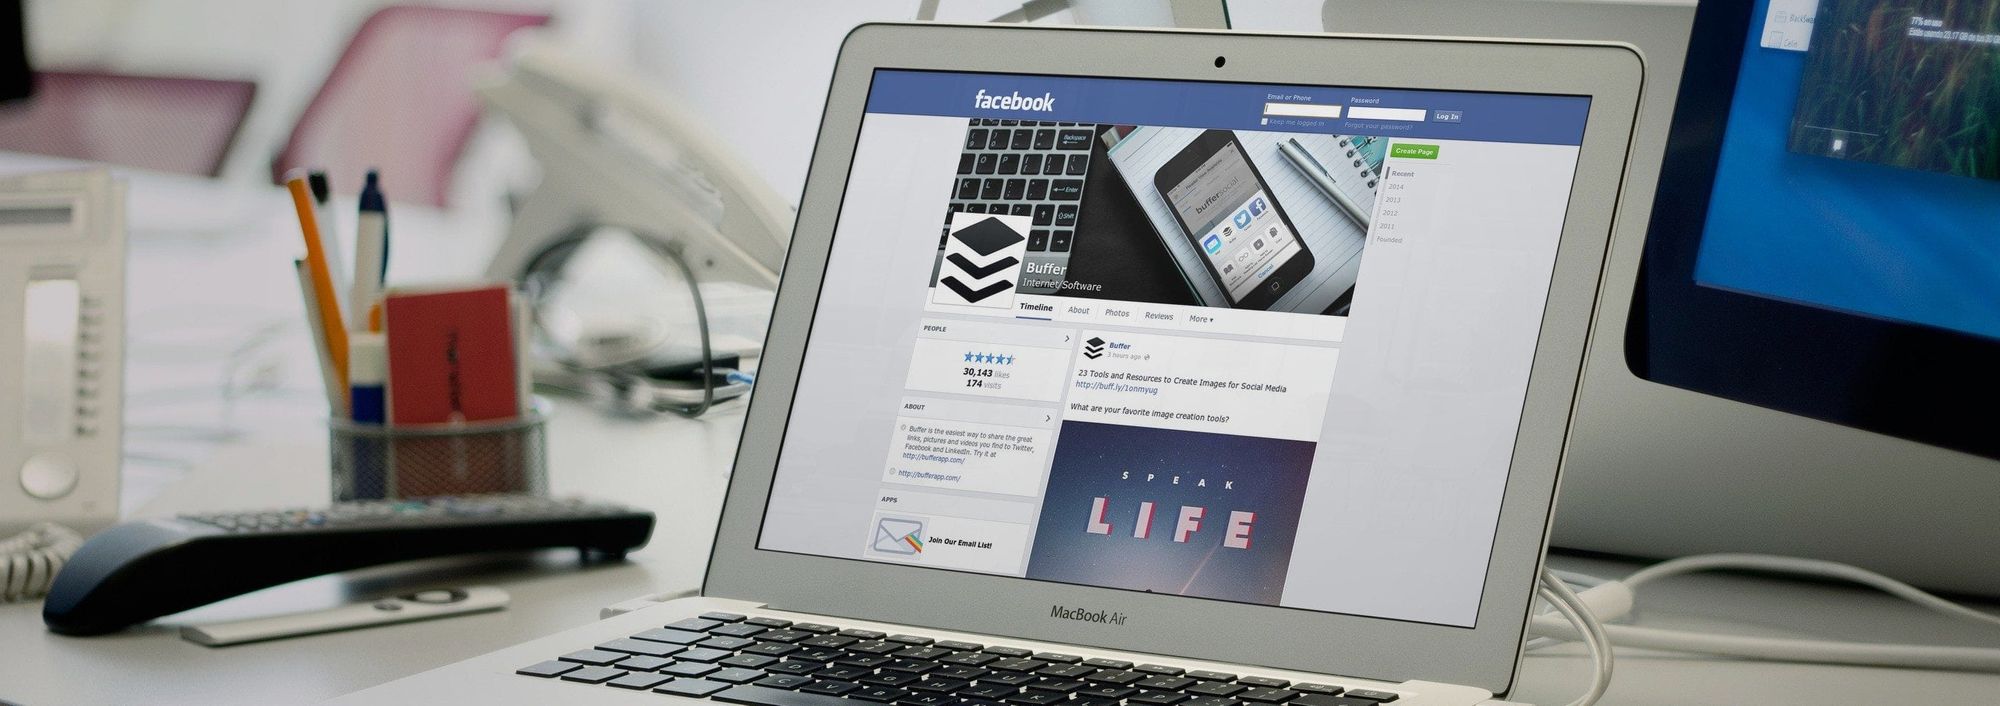 Anatomy of a Perfect Facebook Post: Exactly What to Post to Get Better Results